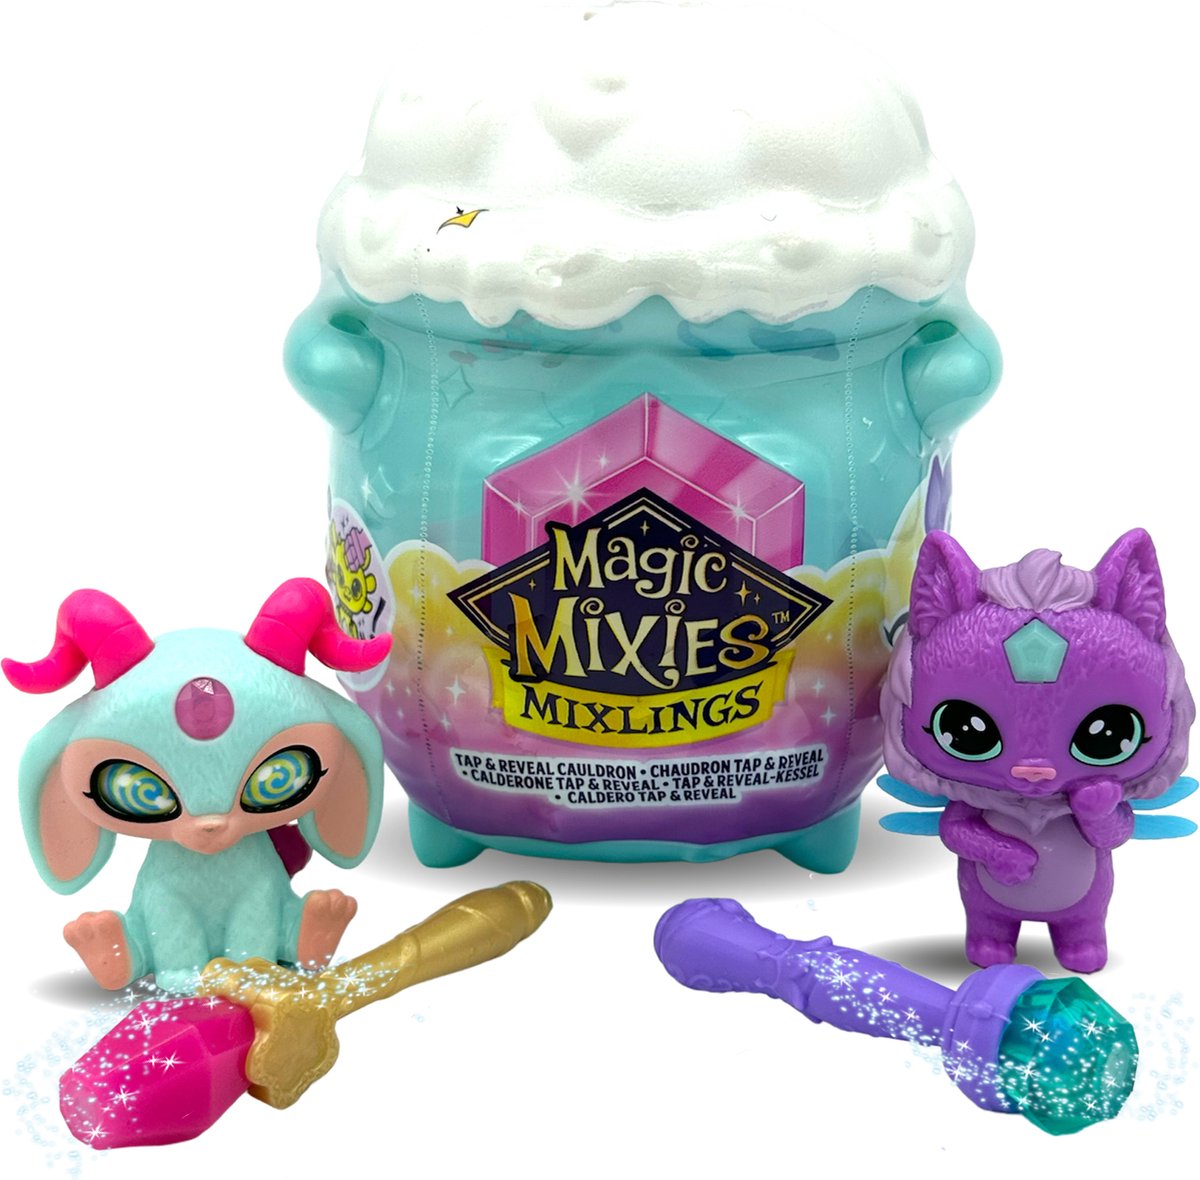 Magic Mixies Mixlings - Tap & Discover Kettle (Duo pack)